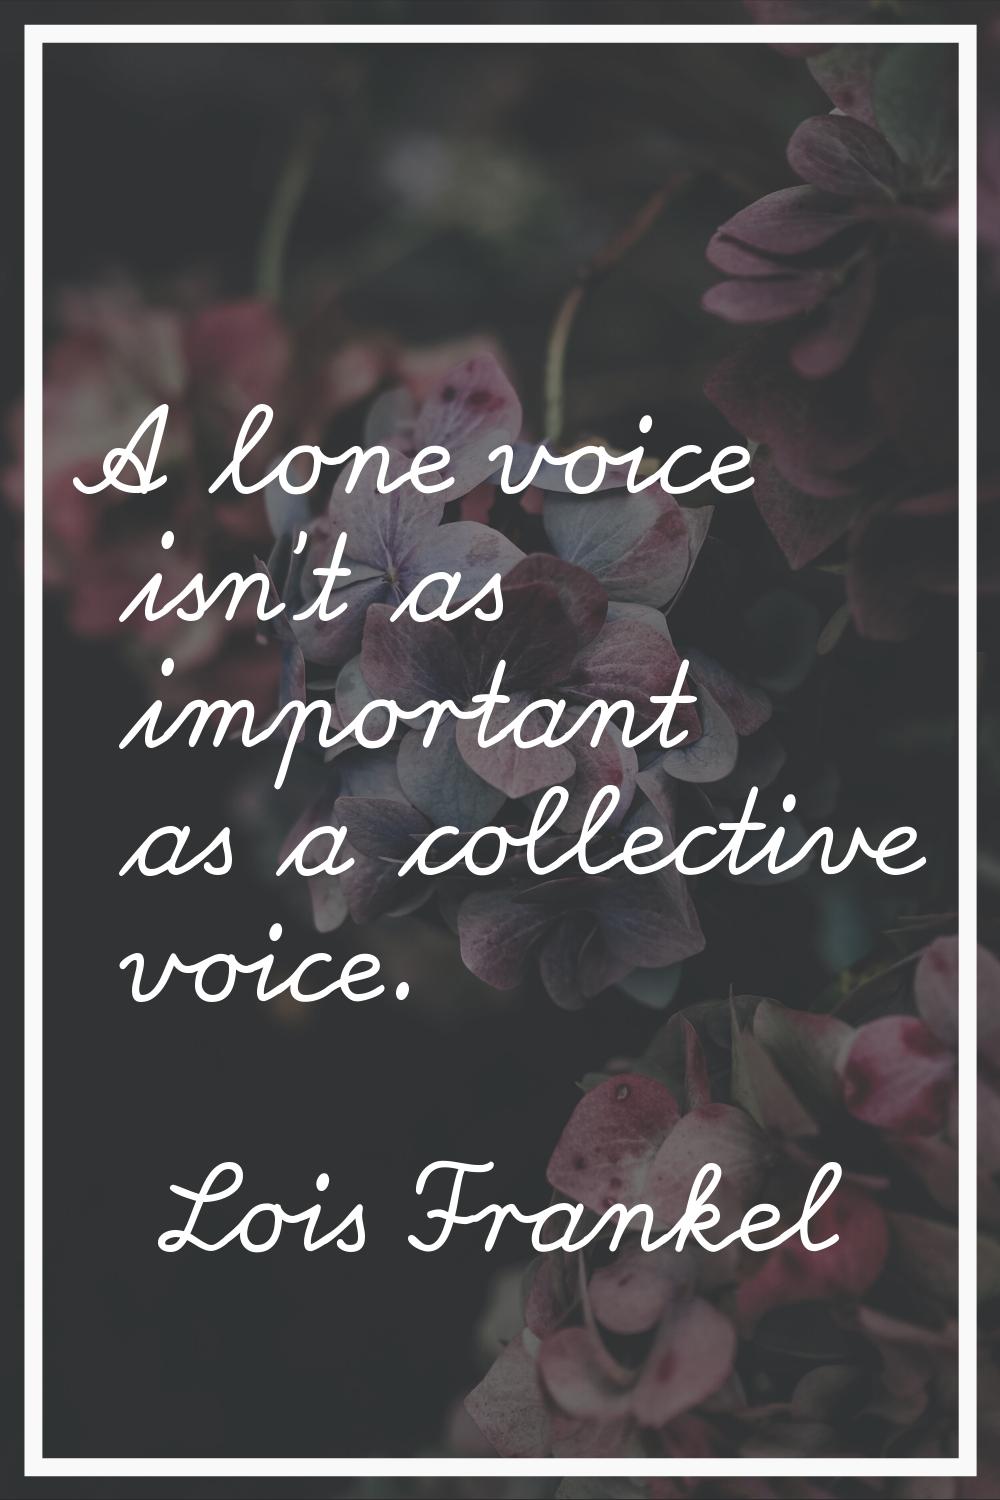 A lone voice isn't as important as a collective voice.